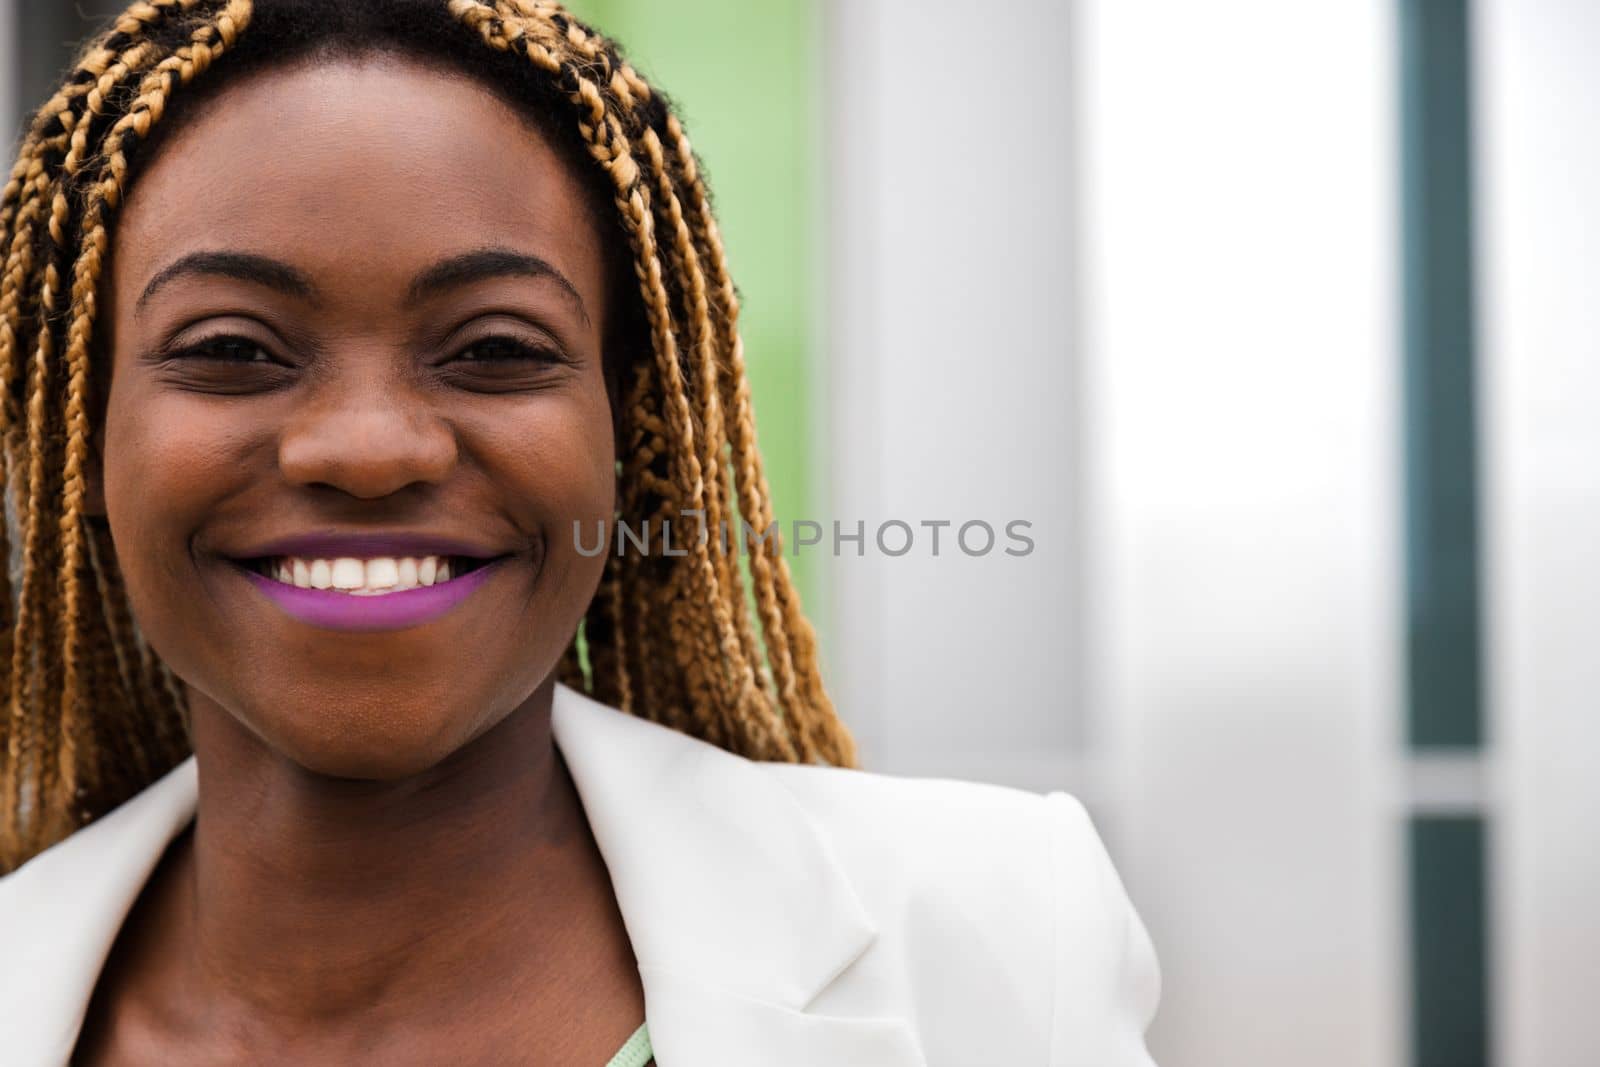 Portrait headshot of happy young African American woman with blond braided hair looking at camera. Copy space. Lifestyle.